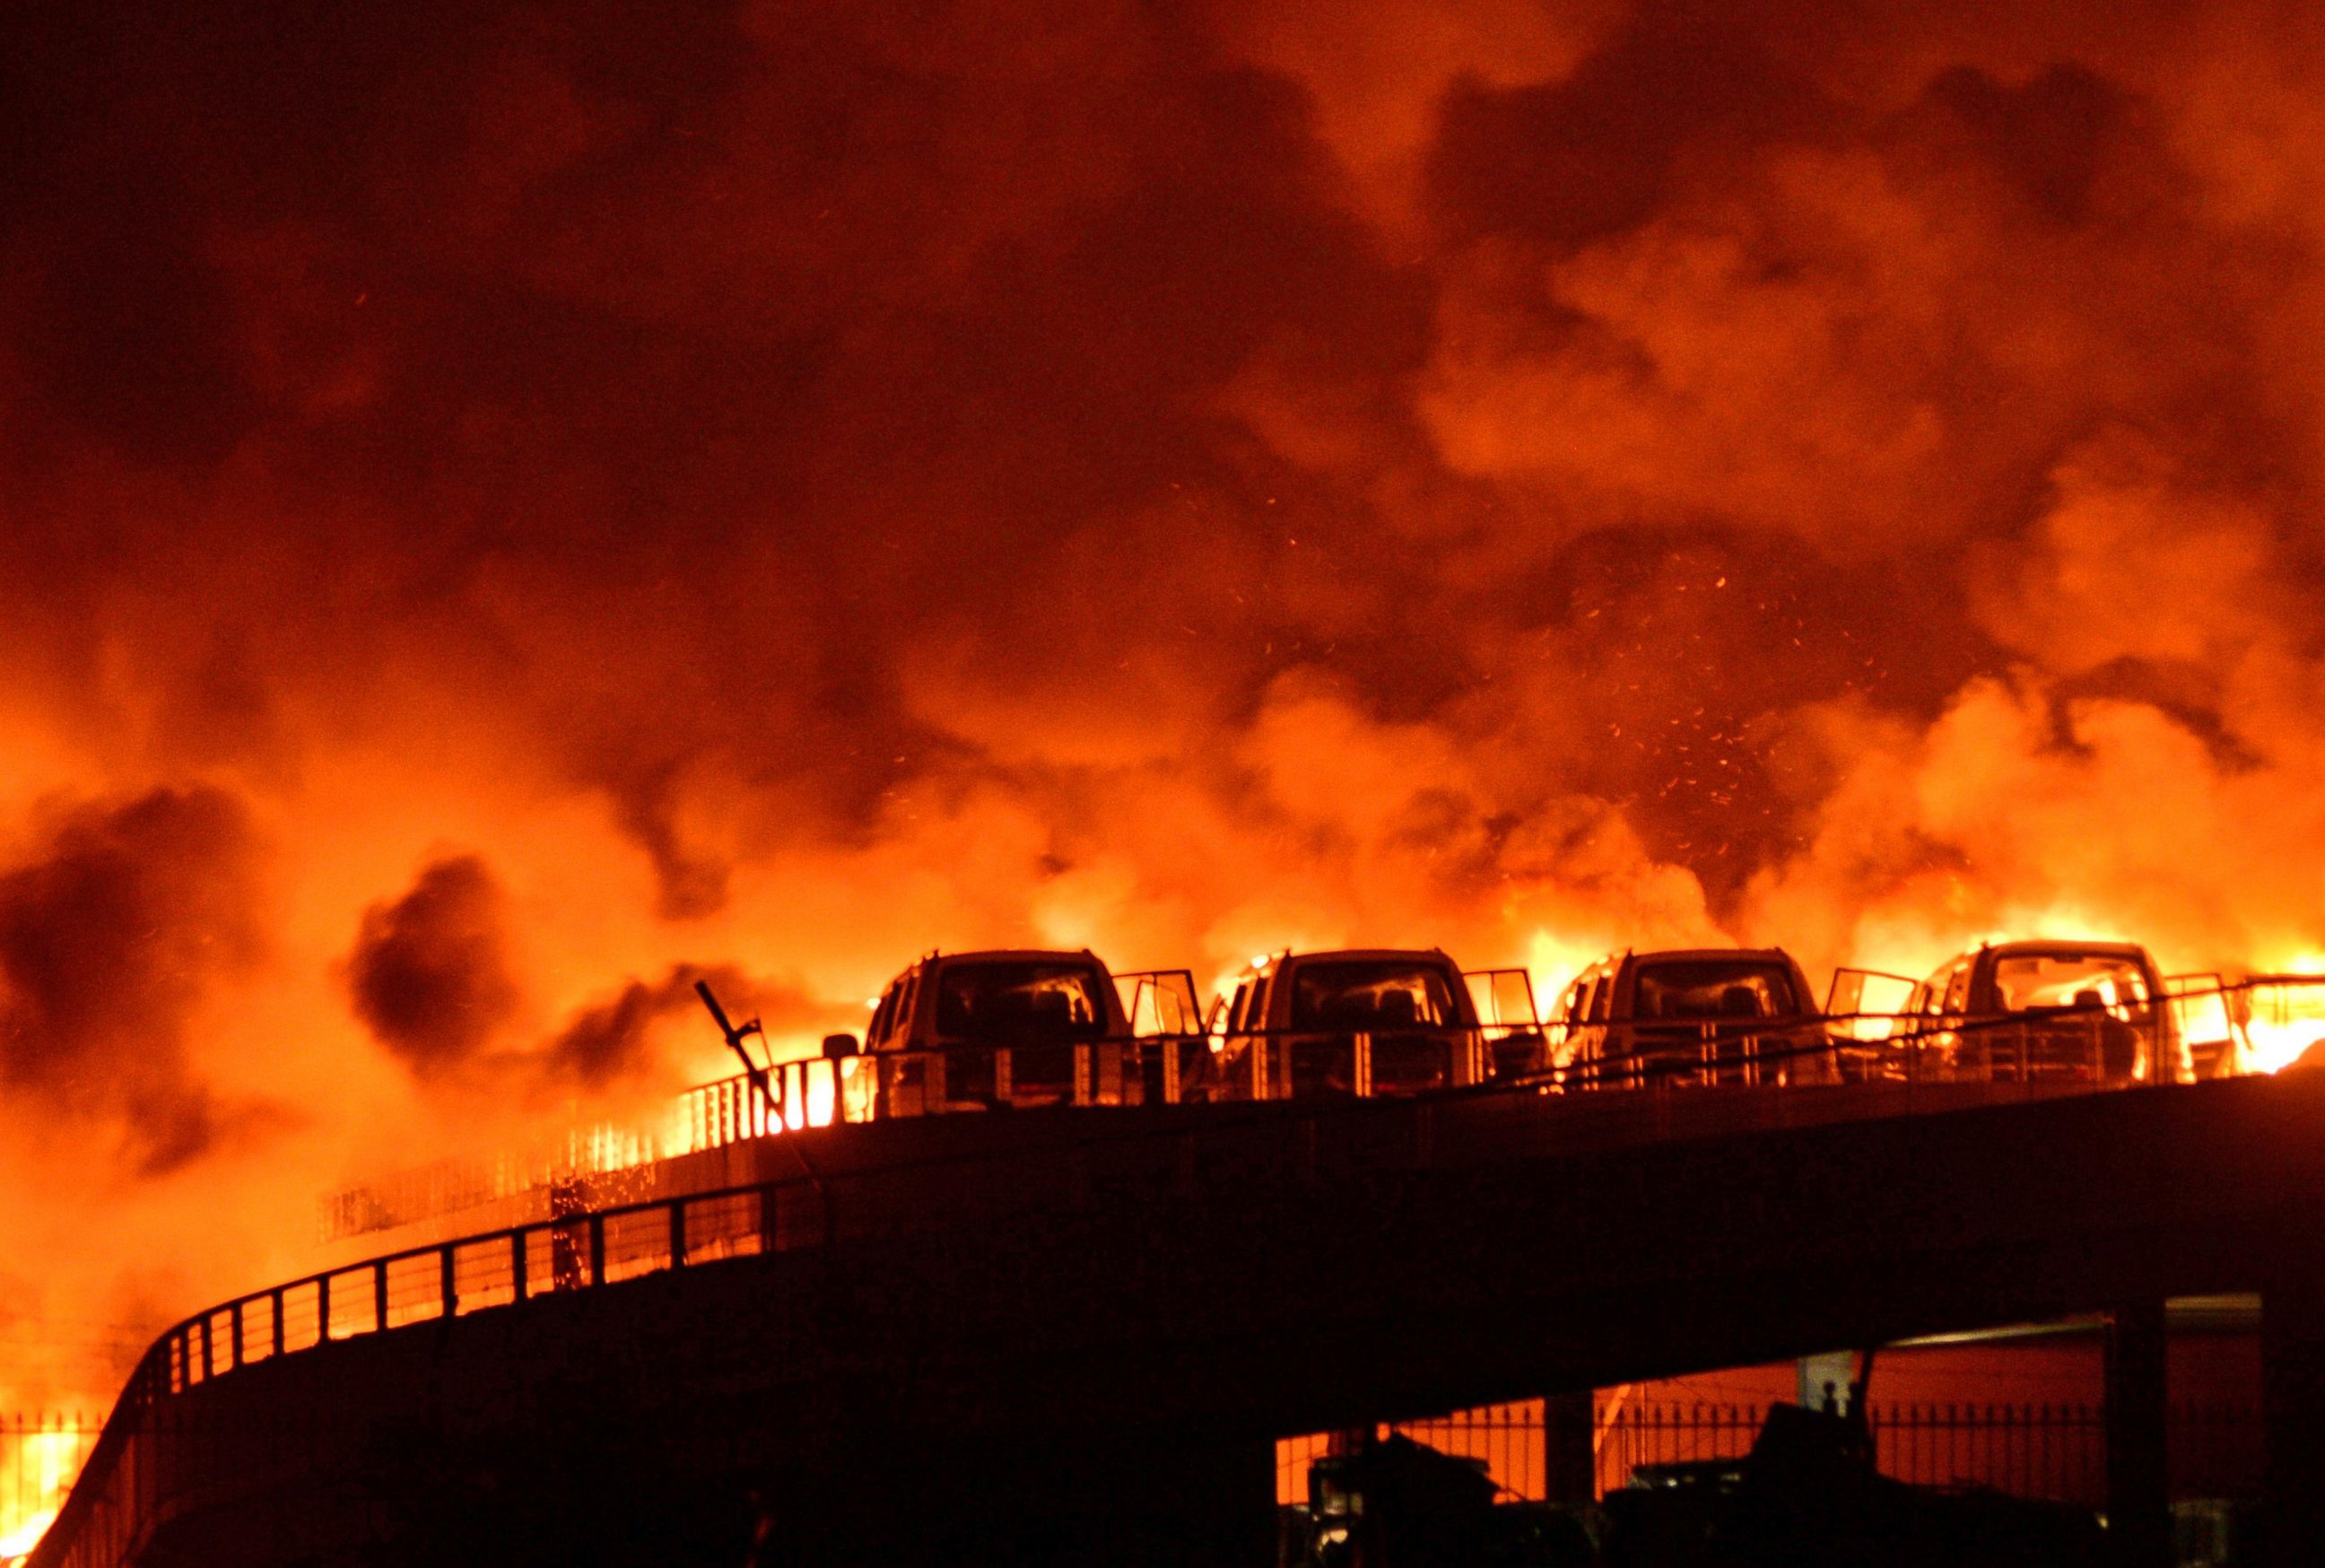 PHOTO: Fire and smoke are seen after explosions at a warehouse in Binhai New Area on Aug. 13, 2015 in Tianjin, China. 